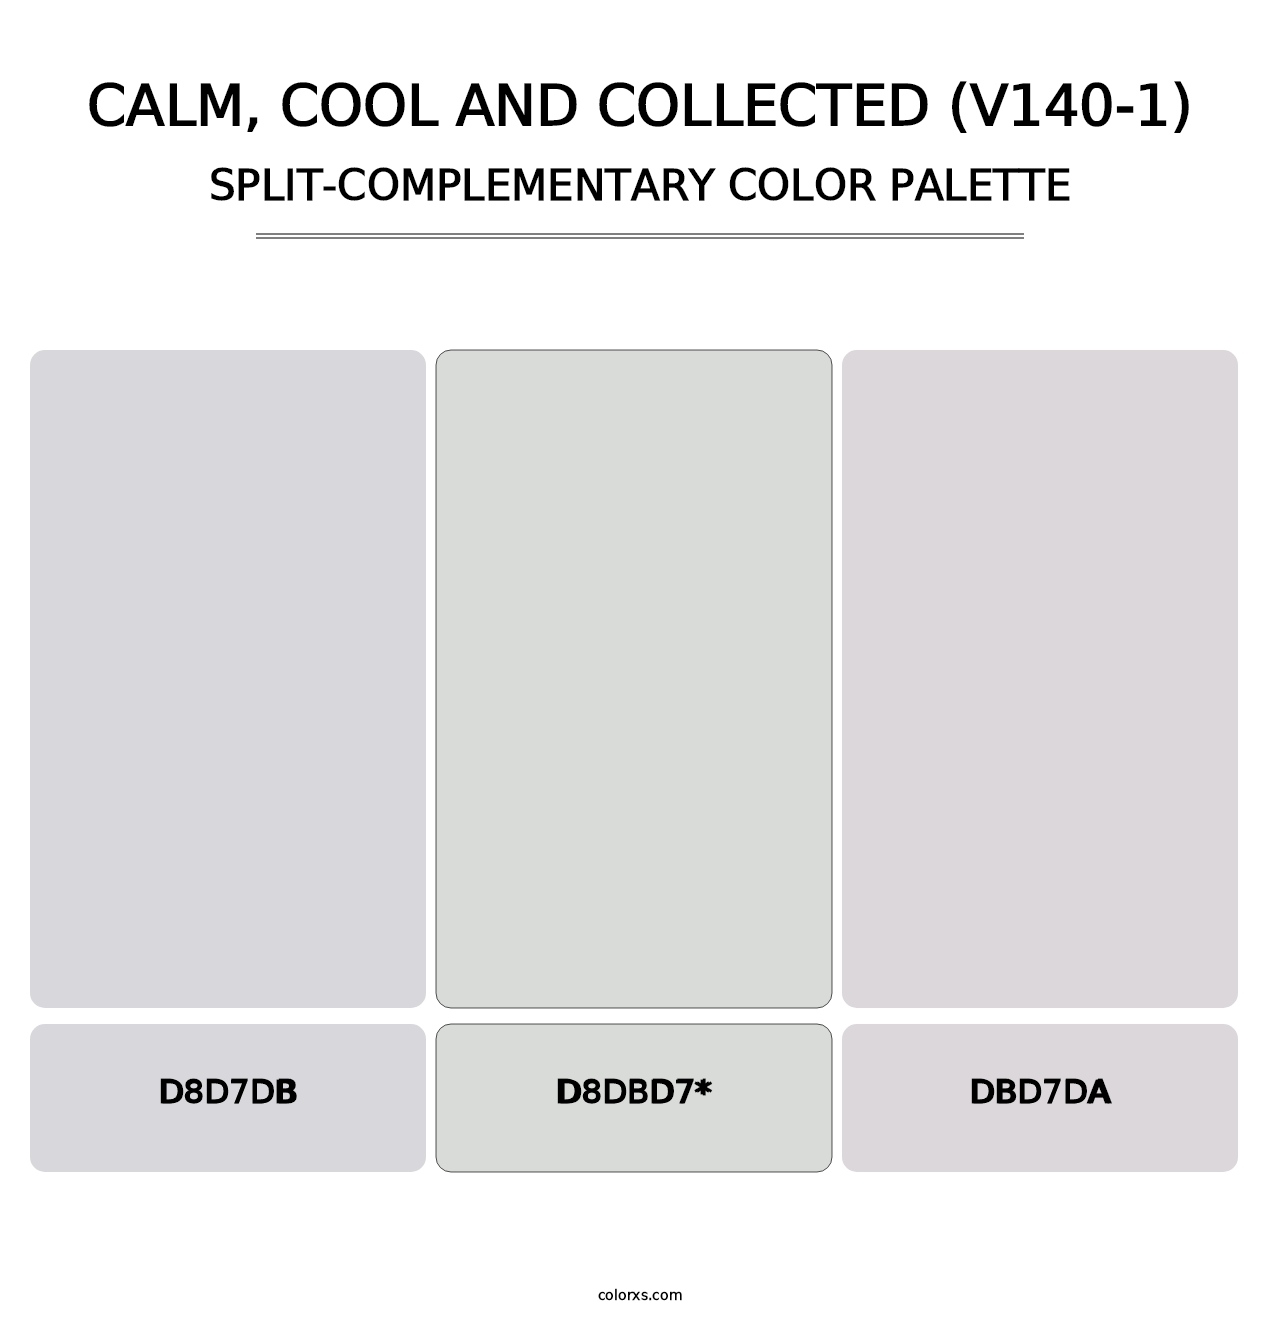 Calm, Cool and Collected (V140-1) - Split-Complementary Color Palette